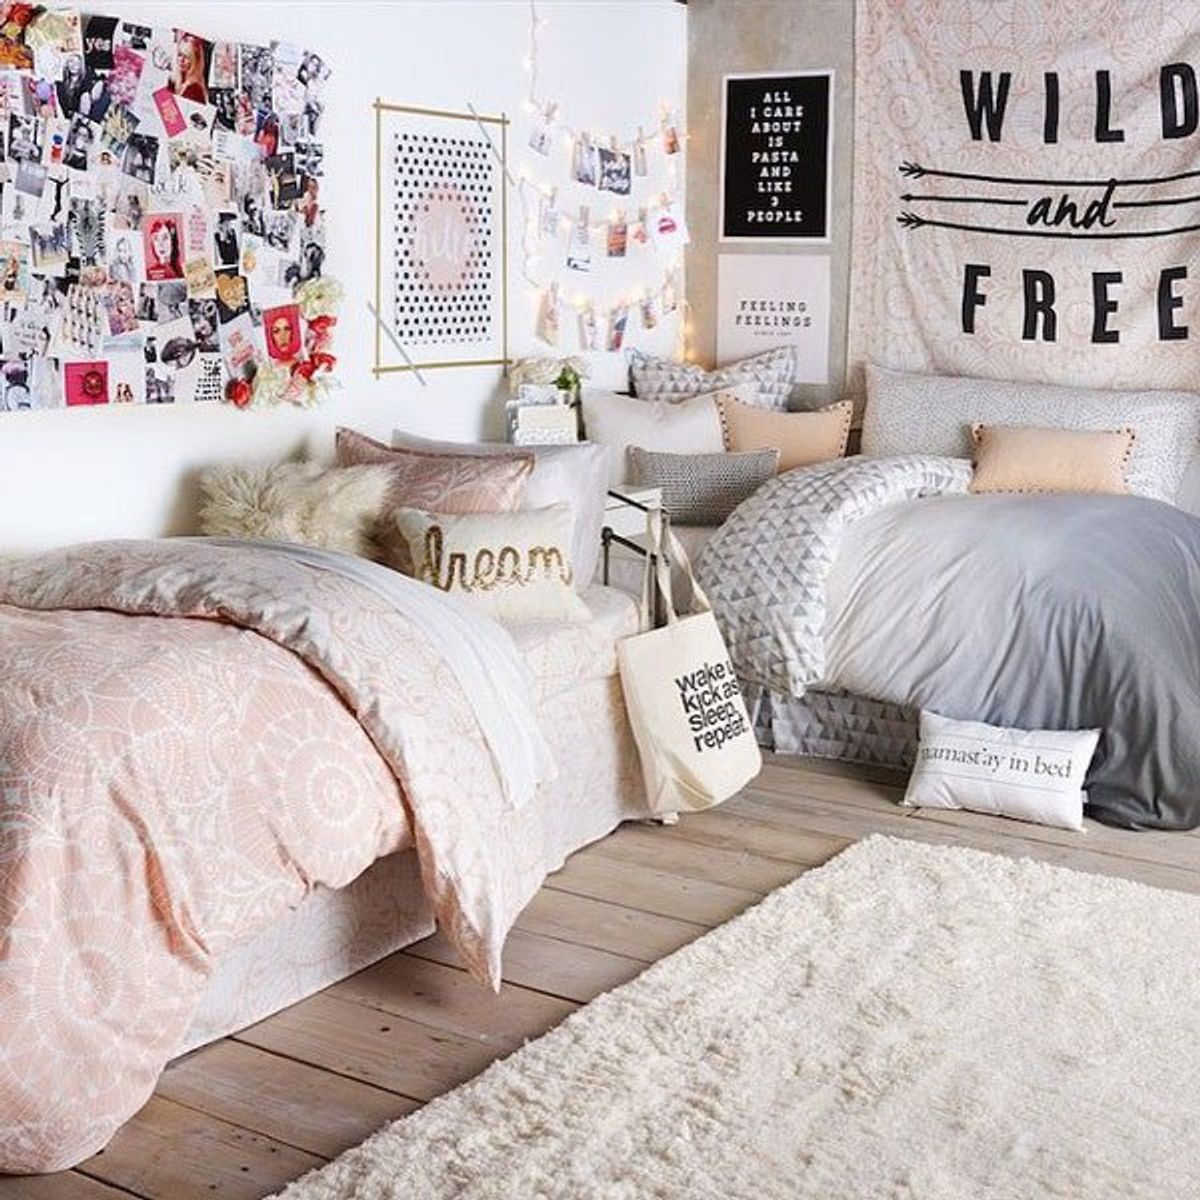 7 Things To Bring To Your College Dorm Room